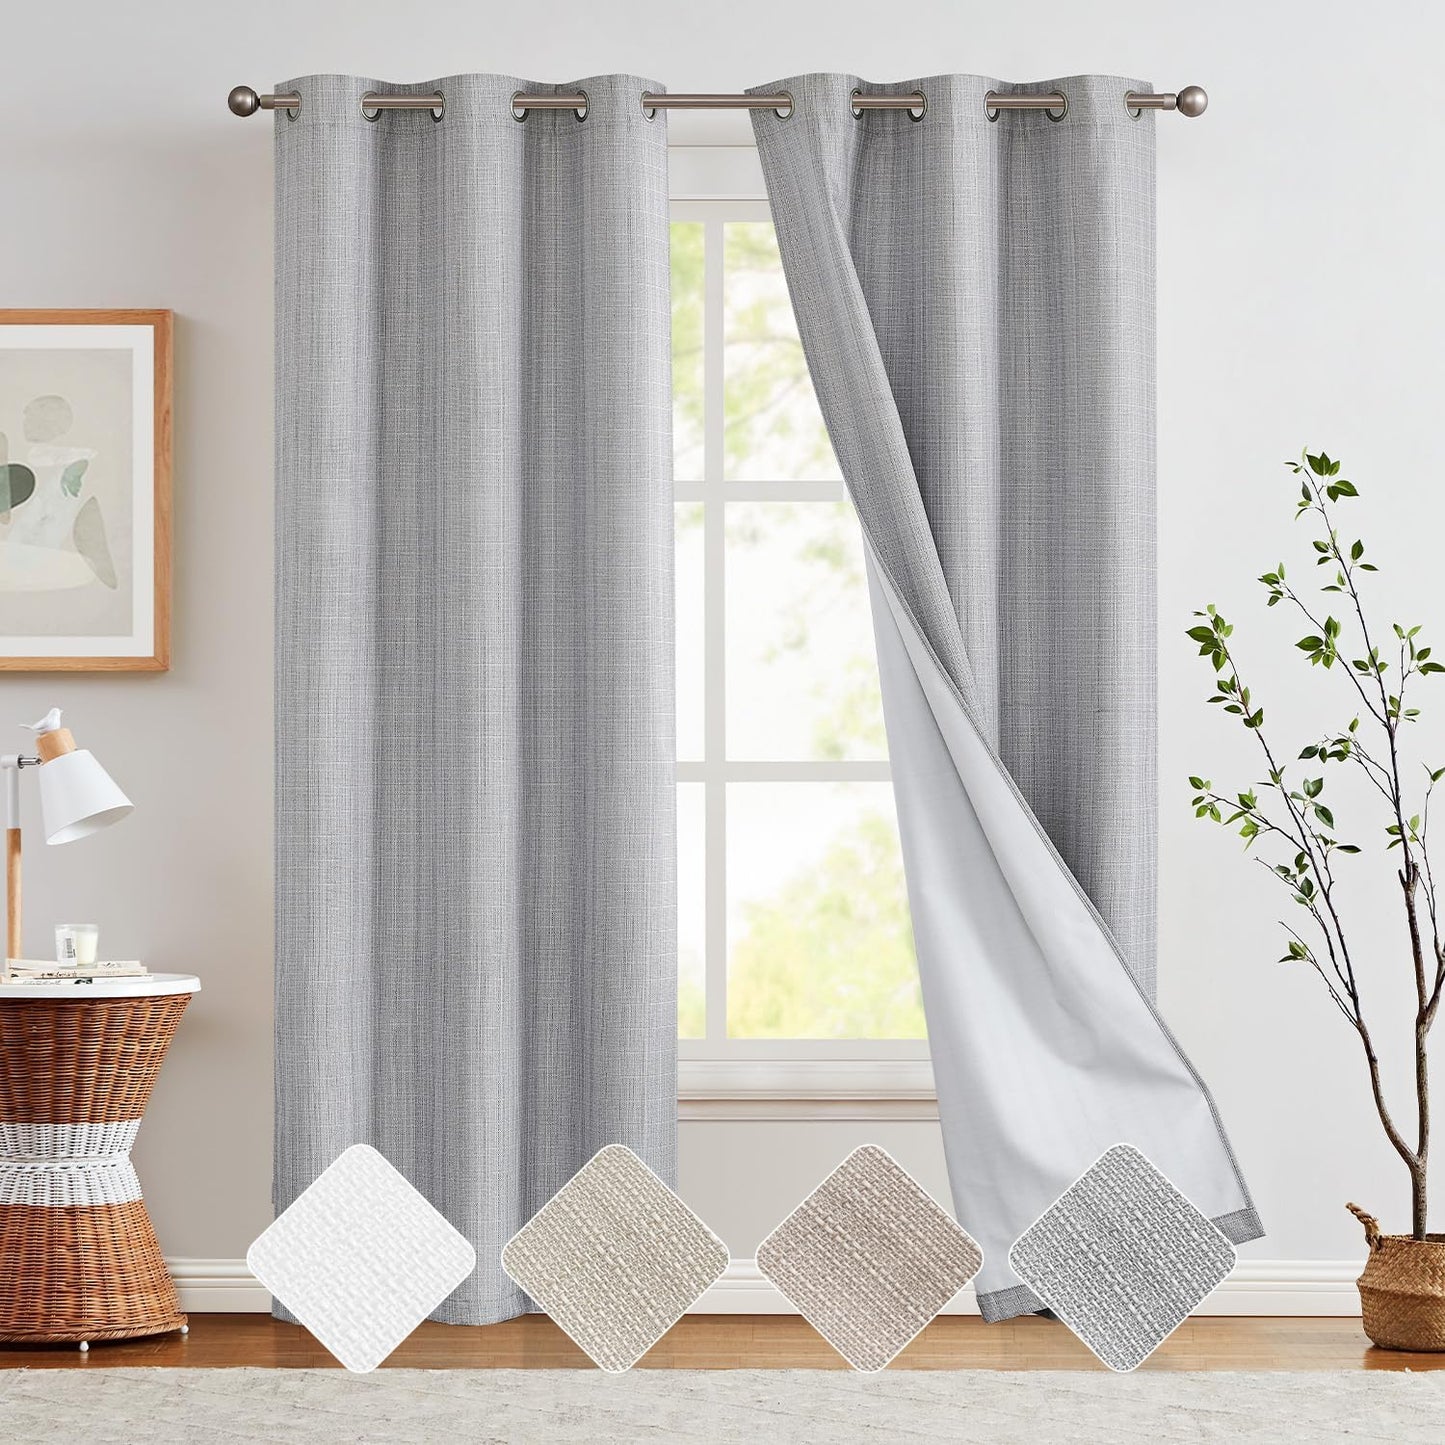 COLLACT White Linen Textured Curtains 84 Inch Length 2 Panels for Living Room Casual Weave Light Filtering Semi Sheer Curtains & Drapes for Bedroom Grommet Top Window Treatments, W38 X L84, White  COLLACT Blackout | Heathered Grey W38 X L96 